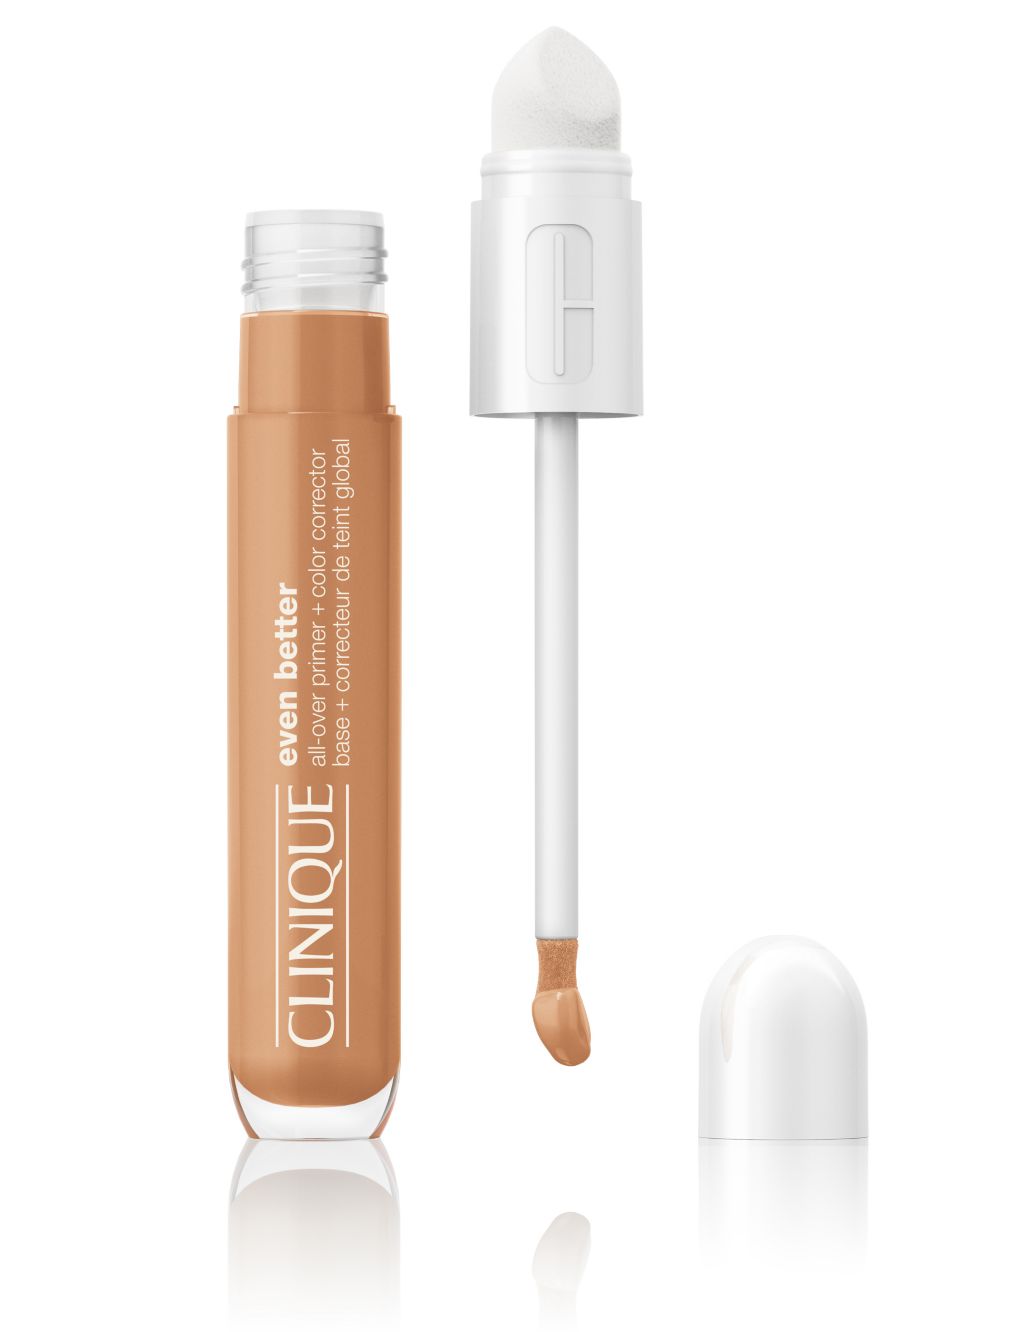 Even Better™ Pore Primer for a Flawless Look